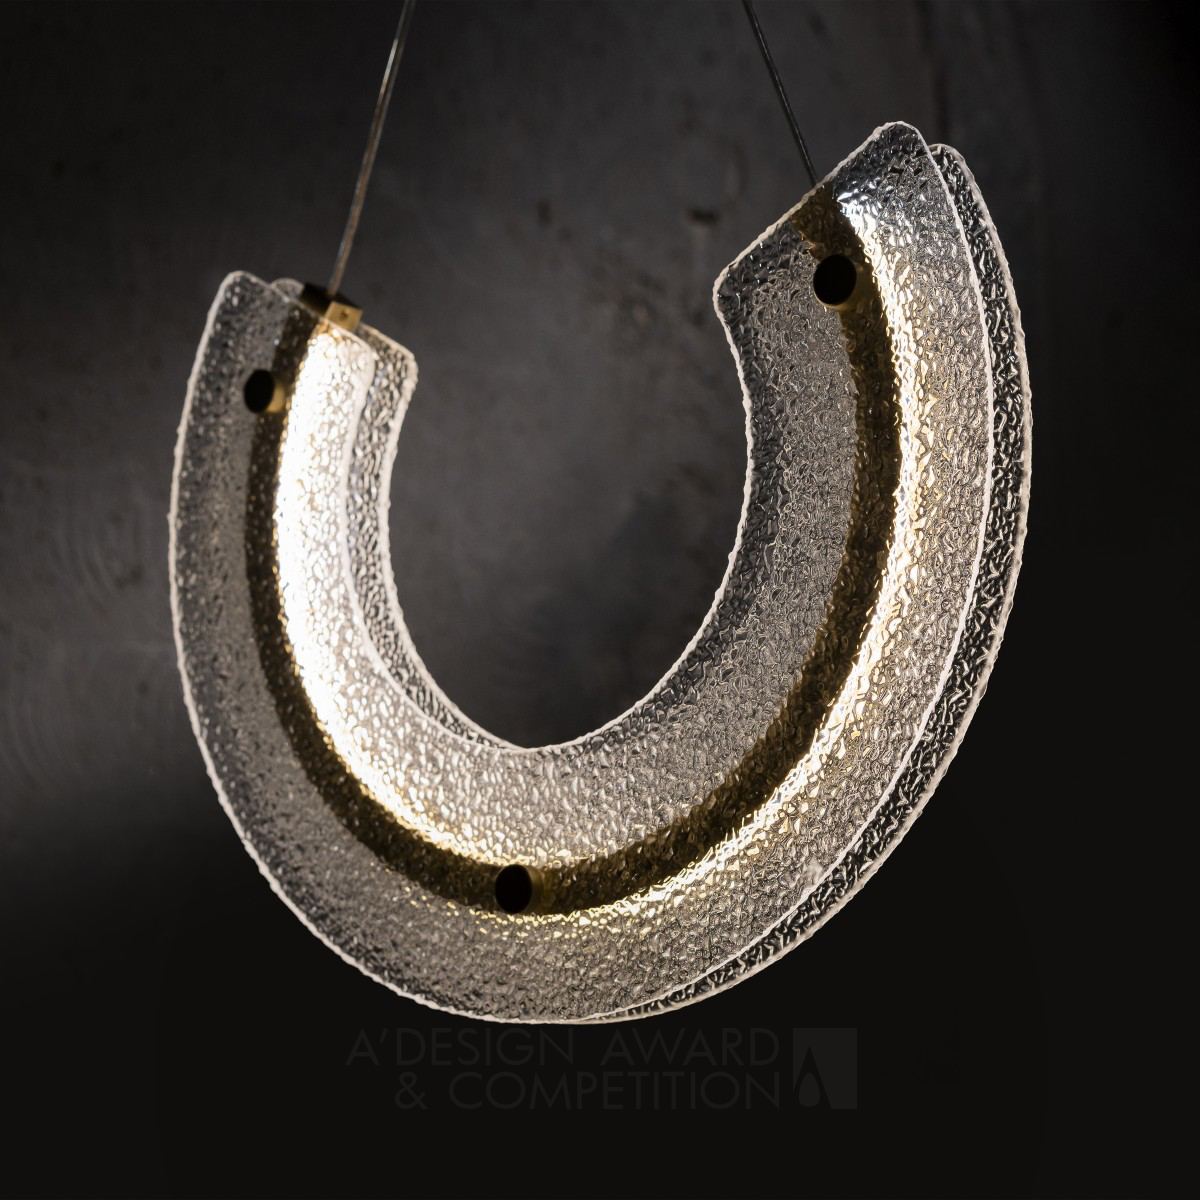 Alexey Danilin wins Silver at the prestigious A' Lighting Products and Fixtures Design Award with Maya Pendant Lamp.